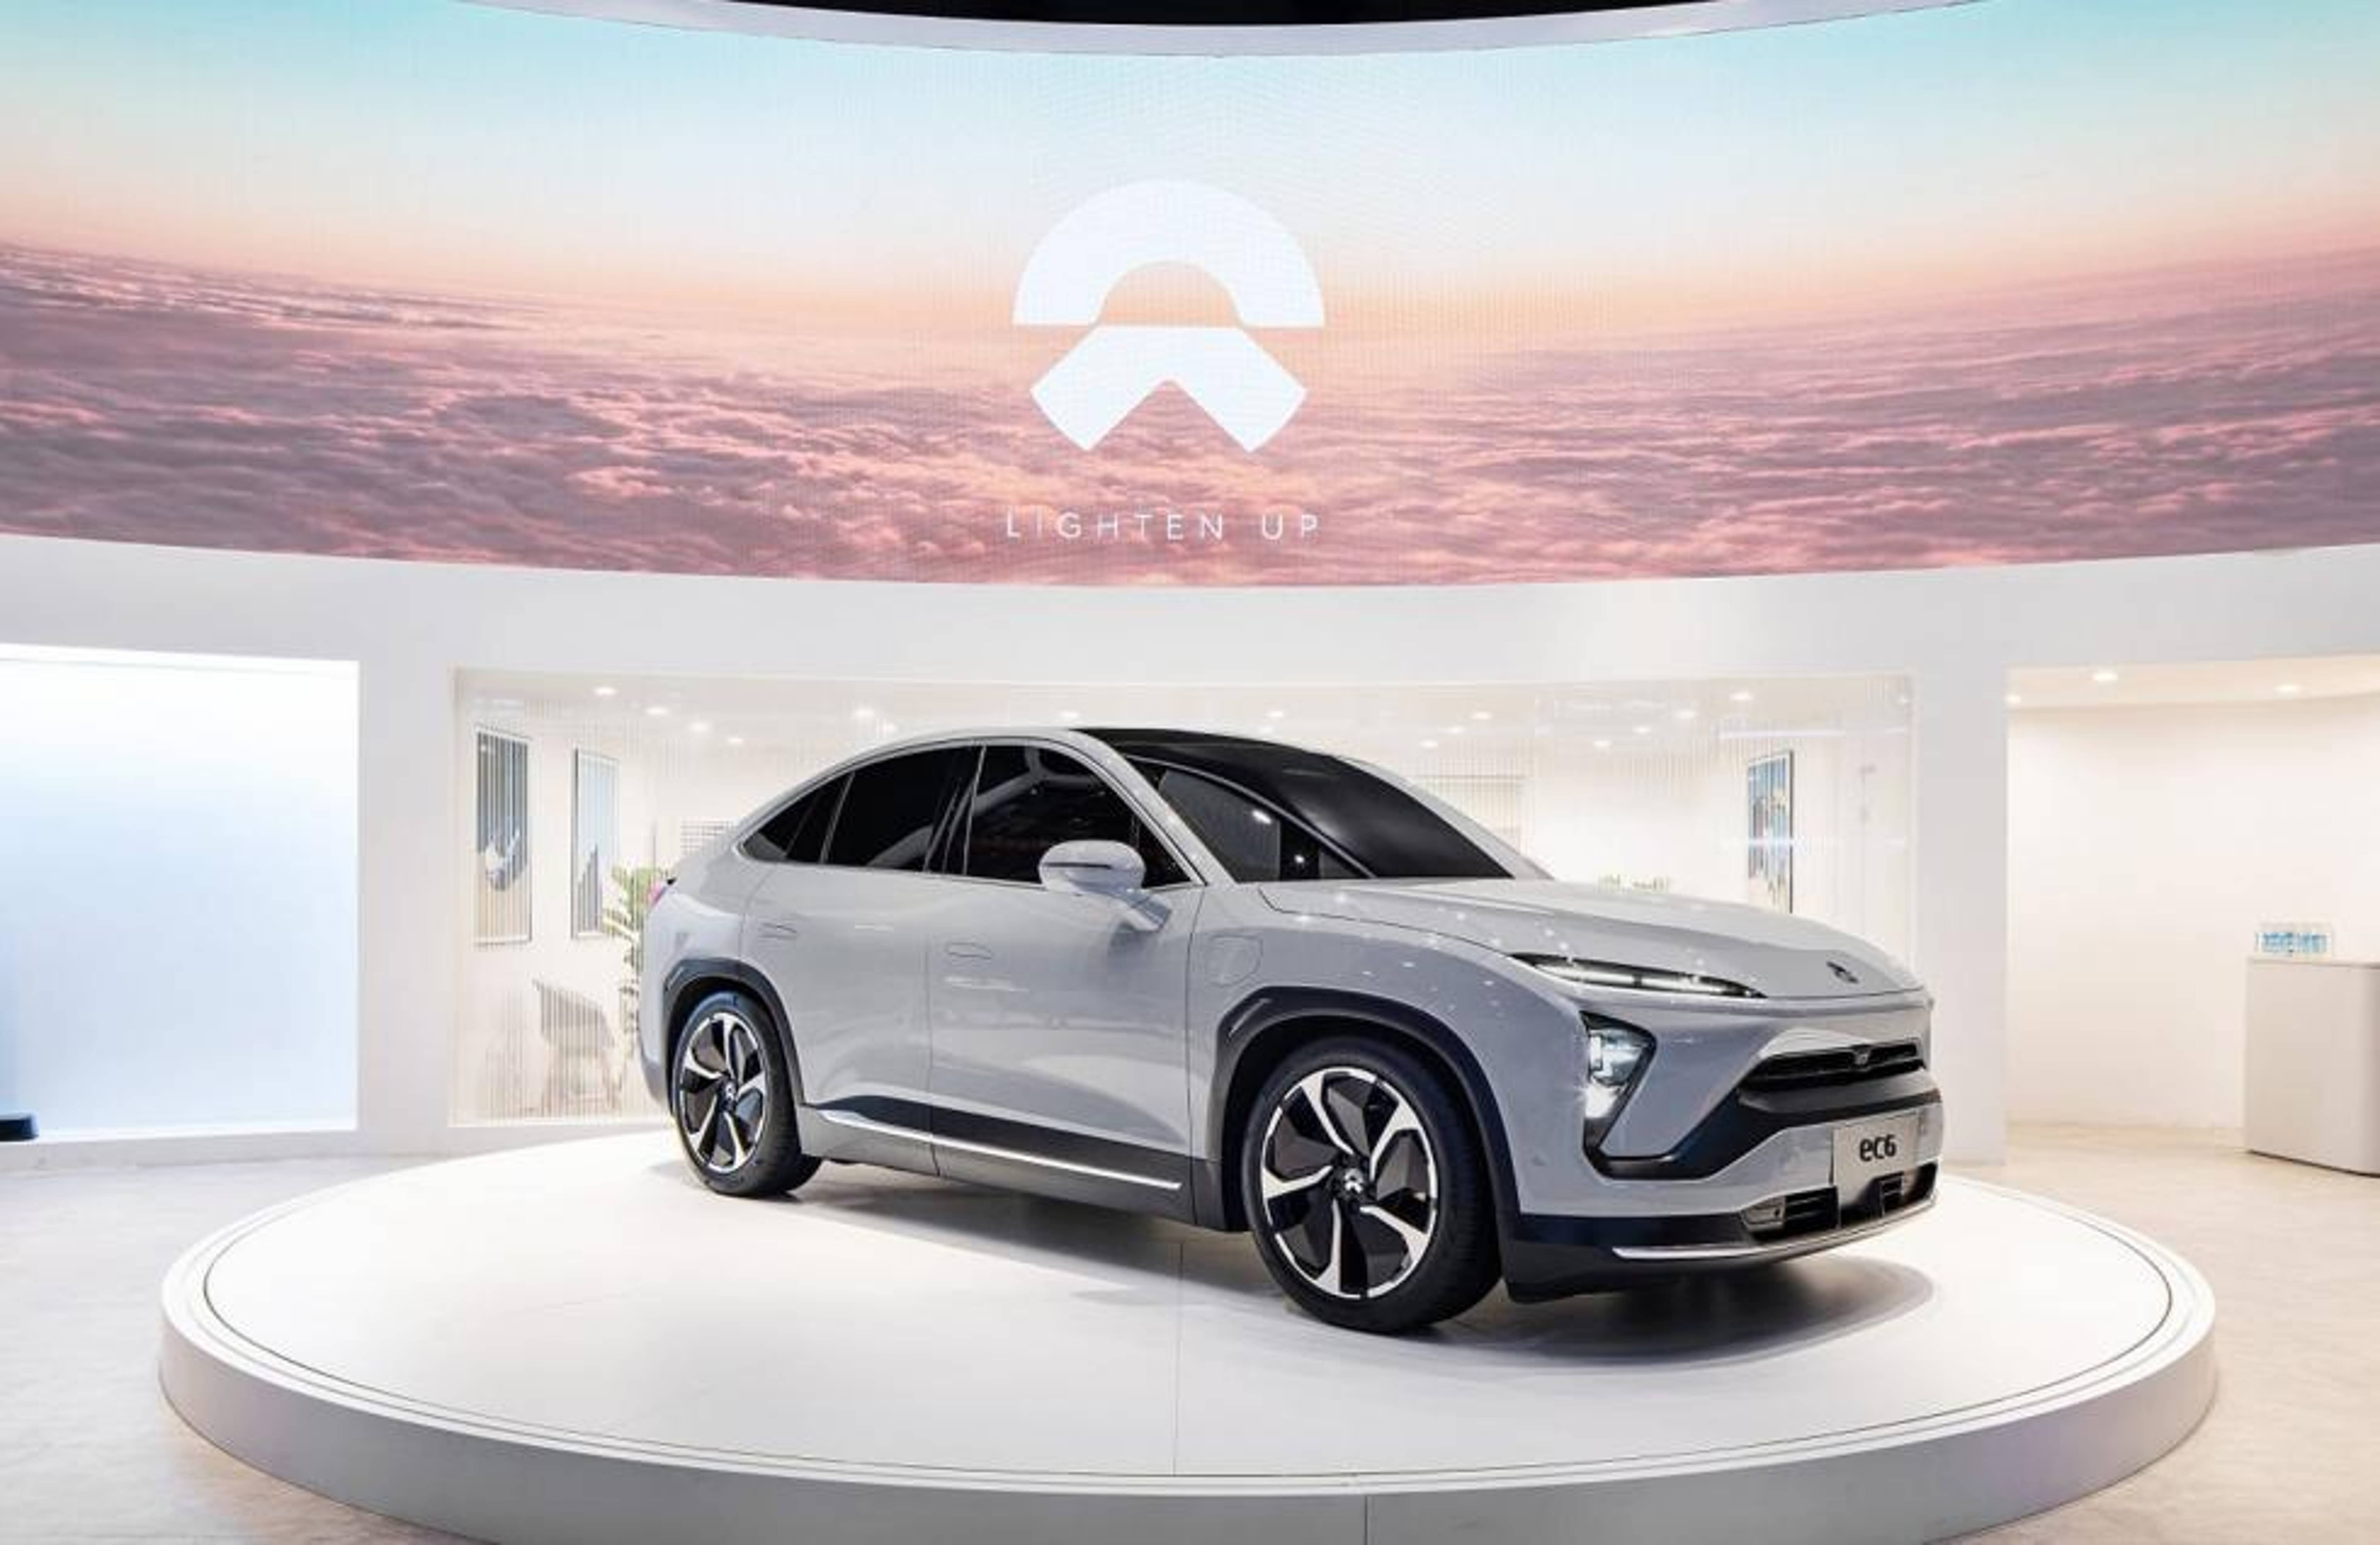 Nio Begins Delivery Of Electric EC6 SUV: What You Need To Know